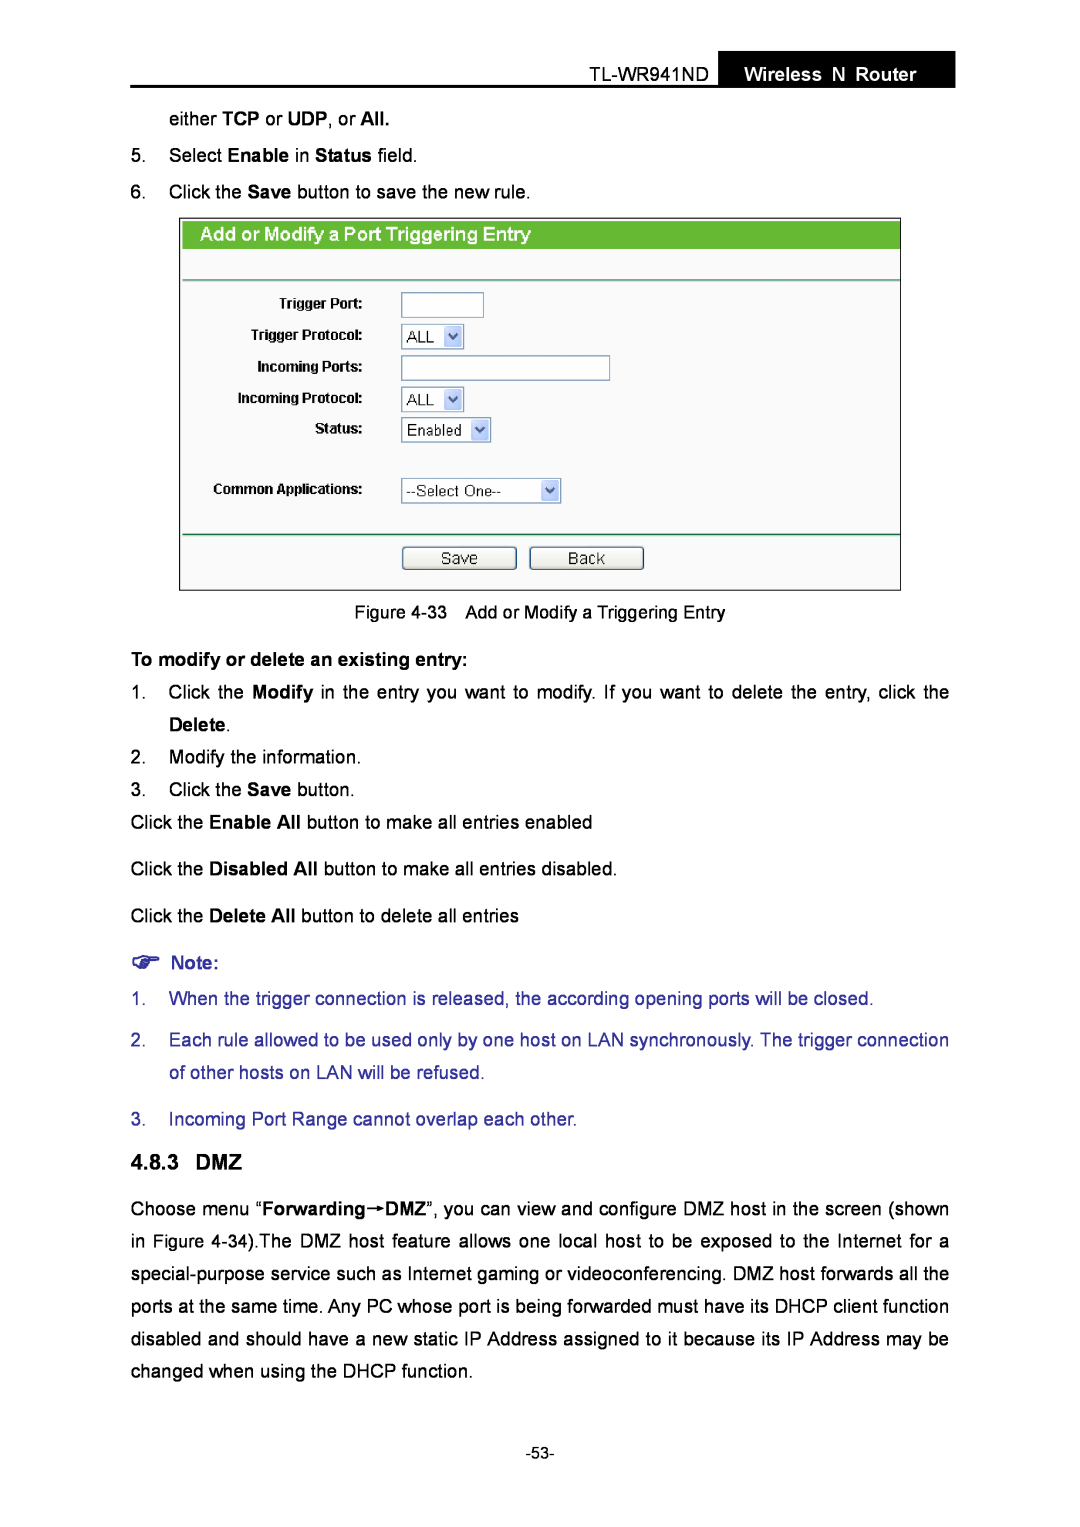 TP-Link manual 4.8.3 DMZ, Incoming Port Range cannot overlap each other, TL-WR941ND Wireless N Router 